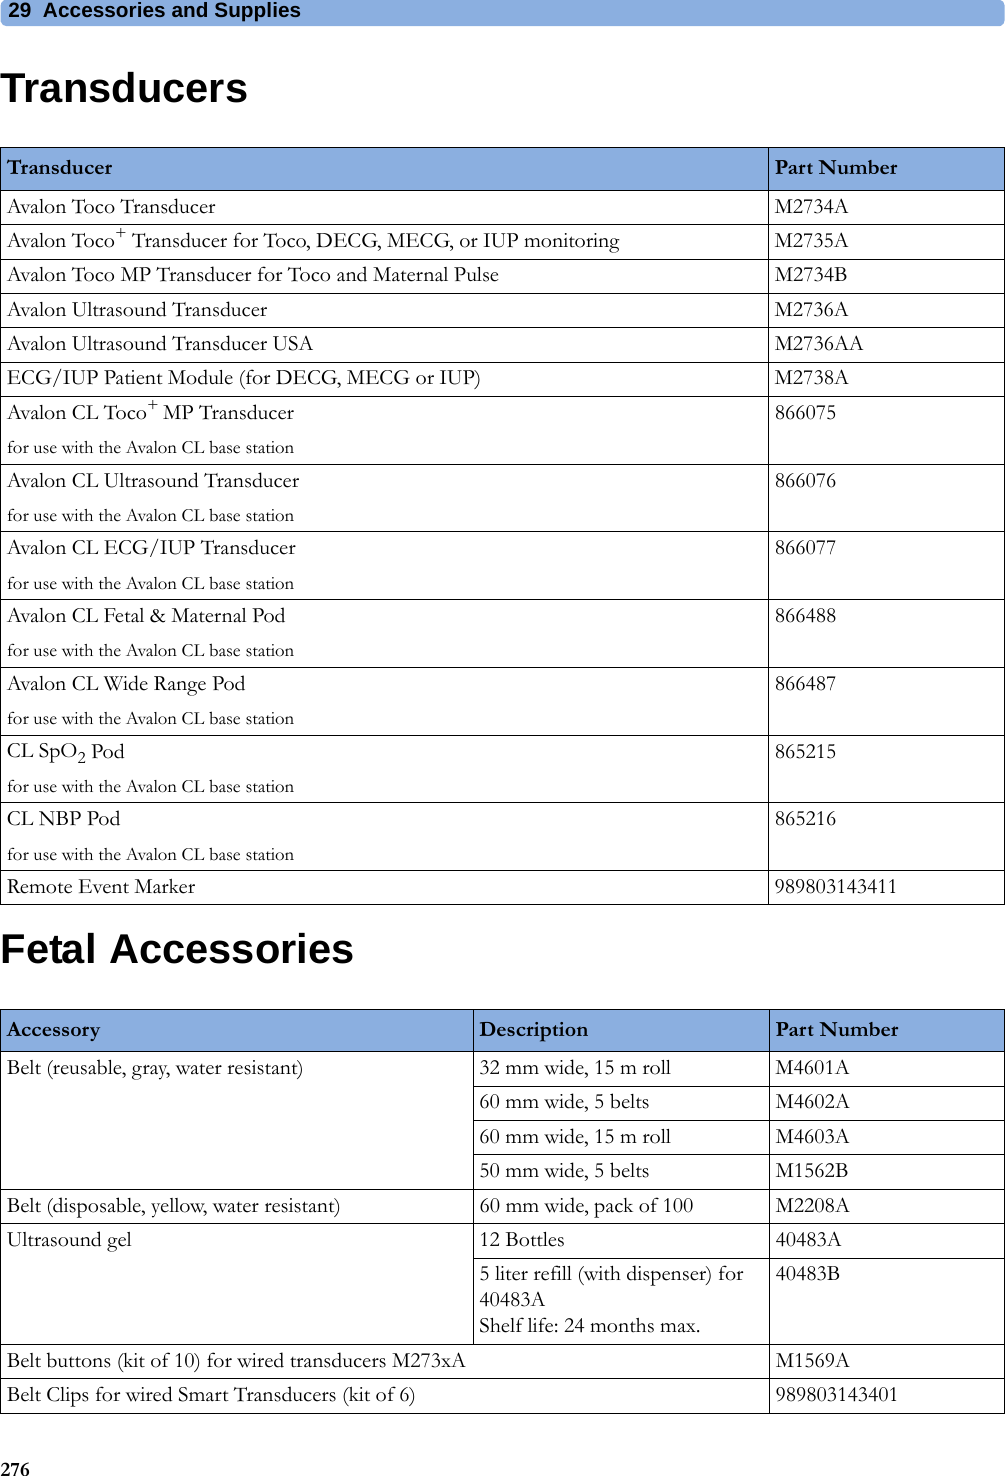 29  Accessories and Supplies276TransducersFetal AccessoriesTransducer Part NumberAvalon Toco Transducer M2734AAvalon Toco+ Transducer for Toco, DECG, MECG, or IUP monitoring M2735AAvalon Toco MP Transducer for Toco and Maternal Pulse M2734BAvalon Ultrasound Transducer M2736AAvalon Ultrasound Transducer USA M2736AAECG/IUP Patient Module (for DECG, MECG or IUP) M2738AAvalon CL Toco+ MP Transducerfor use with the Avalon CL base station866075Avalon CL Ultrasound Transducerfor use with the Avalon CL base station866076Avalon CL ECG/IUP Transducerfor use with the Avalon CL base station866077Avalon CL Fetal &amp; Maternal Podfor use with the Avalon CL base station866488Avalon CL Wide Range Podfor use with the Avalon CL base station866487CL SpO2 Podfor use with the Avalon CL base station865215CL NBP Podfor use with the Avalon CL base station865216Remote Event Marker 989803143411Accessory Description Part NumberBelt (reusable, gray, water resistant) 32 mm wide, 15 m roll M4601A60 mm wide, 5 belts M4602A60 mm wide, 15 m roll M4603A50 mm wide, 5 belts M1562BBelt (disposable, yellow, water resistant) 60 mm wide, pack of 100 M2208AUltrasound gel 12 Bottles 40483A5 liter refill (with dispenser) for 40483A Shelf life: 24 months max.40483BBelt buttons (kit of 10) for wired transducers M273xA M1569ABelt Clips for wired Smart Transducers (kit of 6) 989803143401